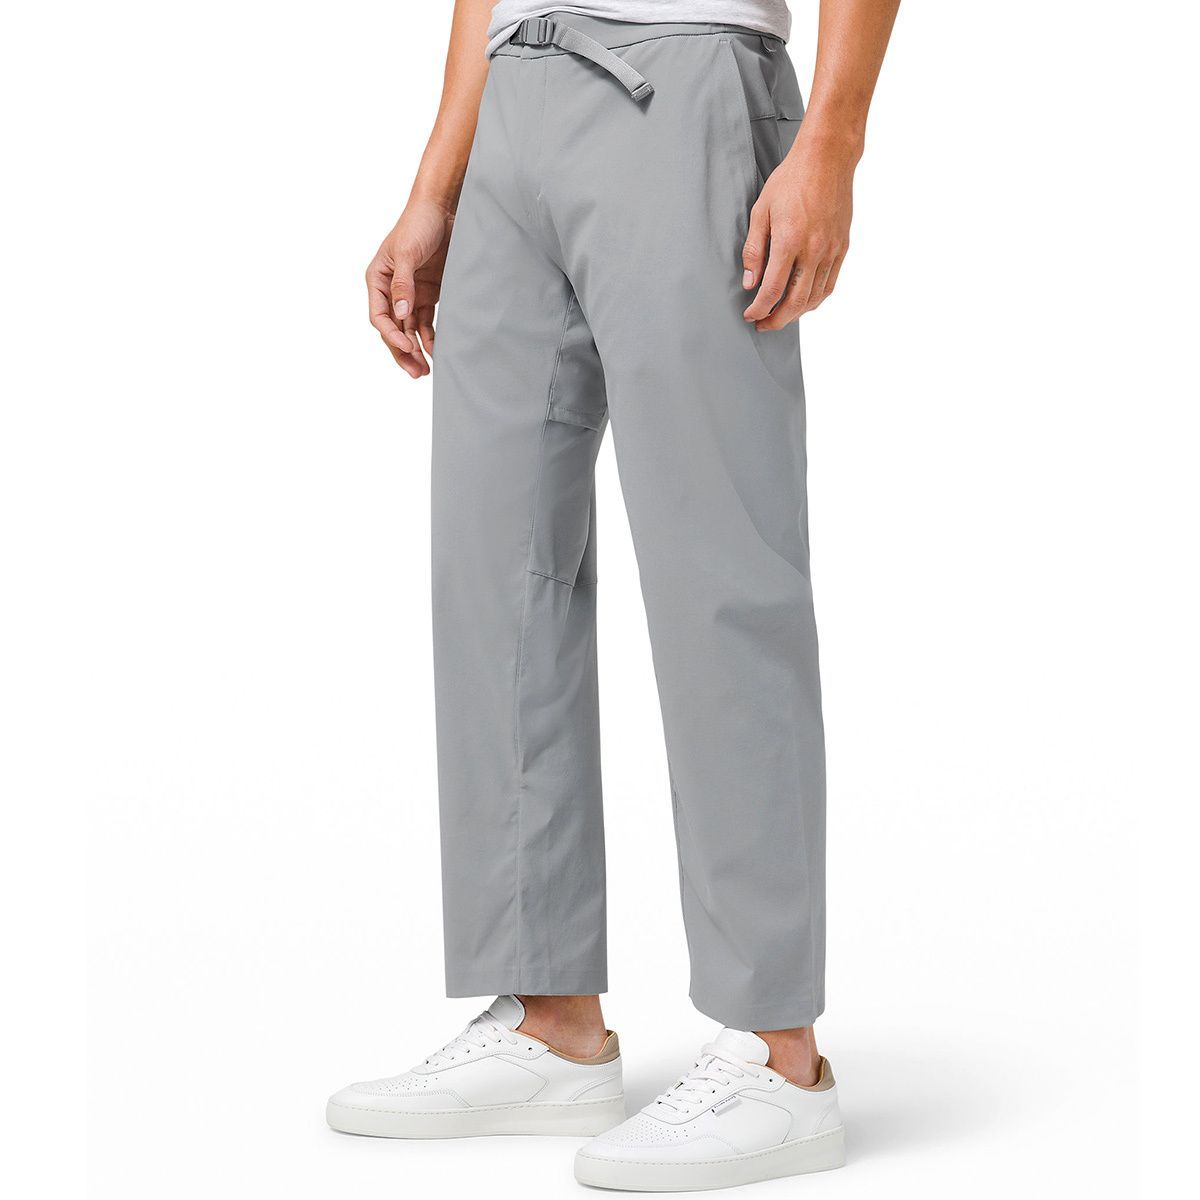 Lululemon Relaxed Fit Belted Stretch Pant